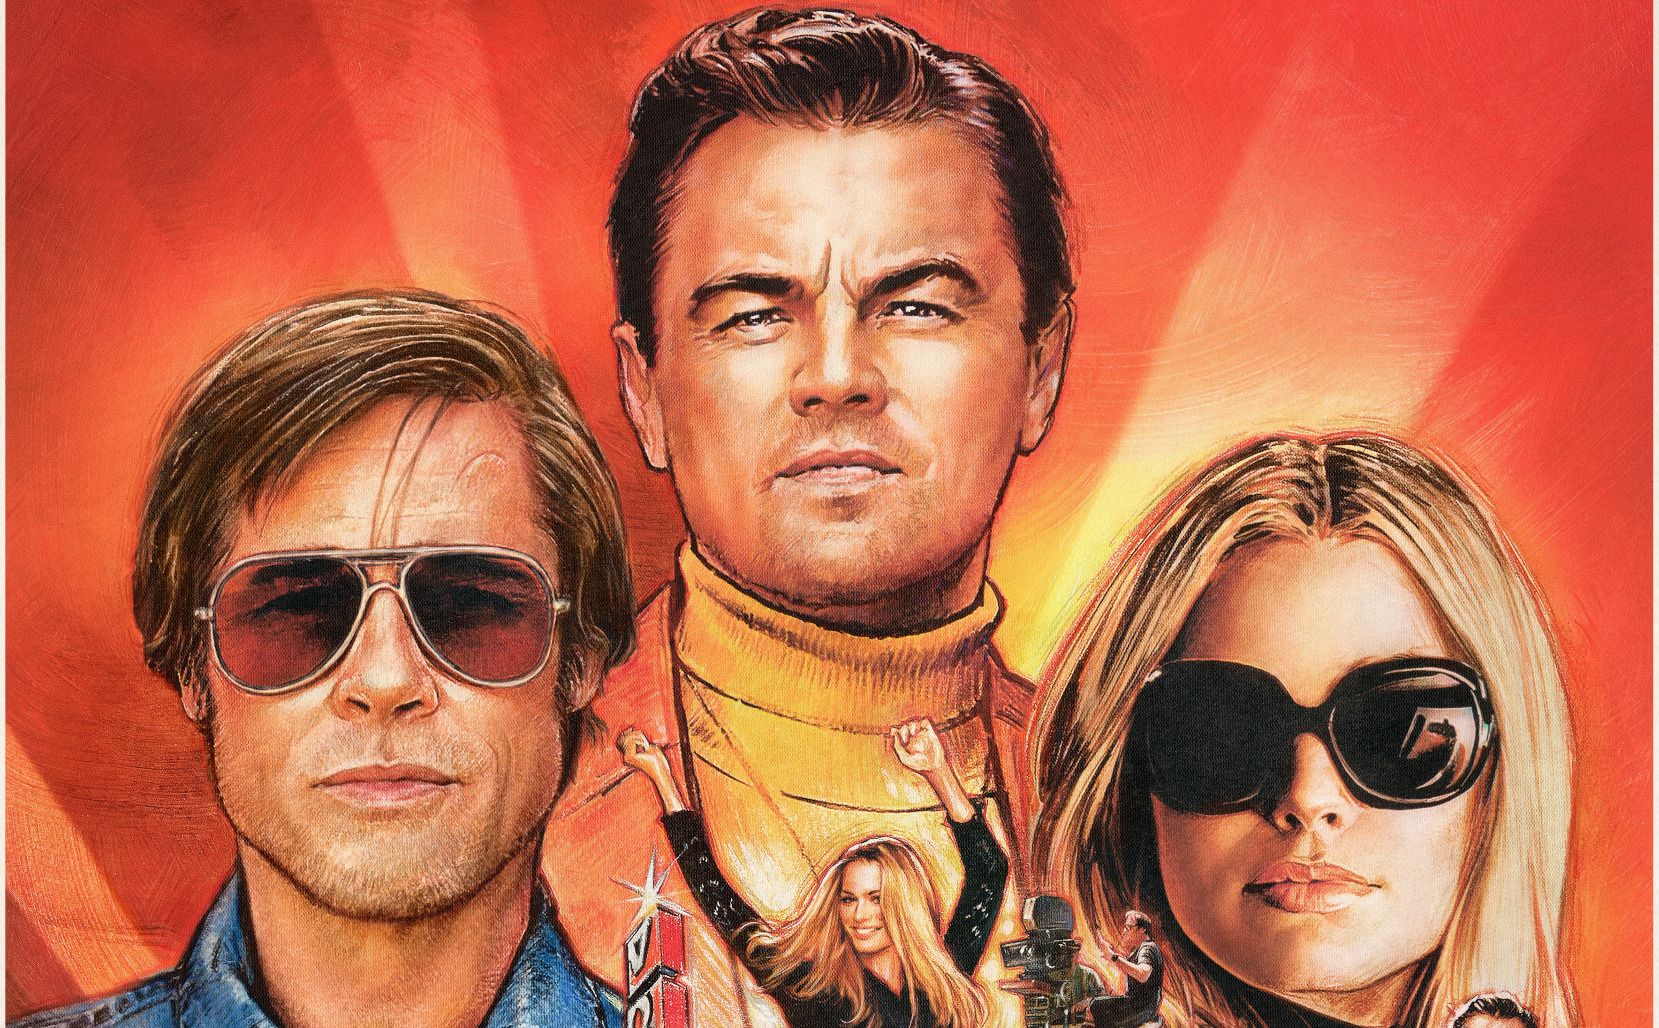 once-upon-a-time-in-hollywood-poster-is-a-retro-movie-mashup-collider